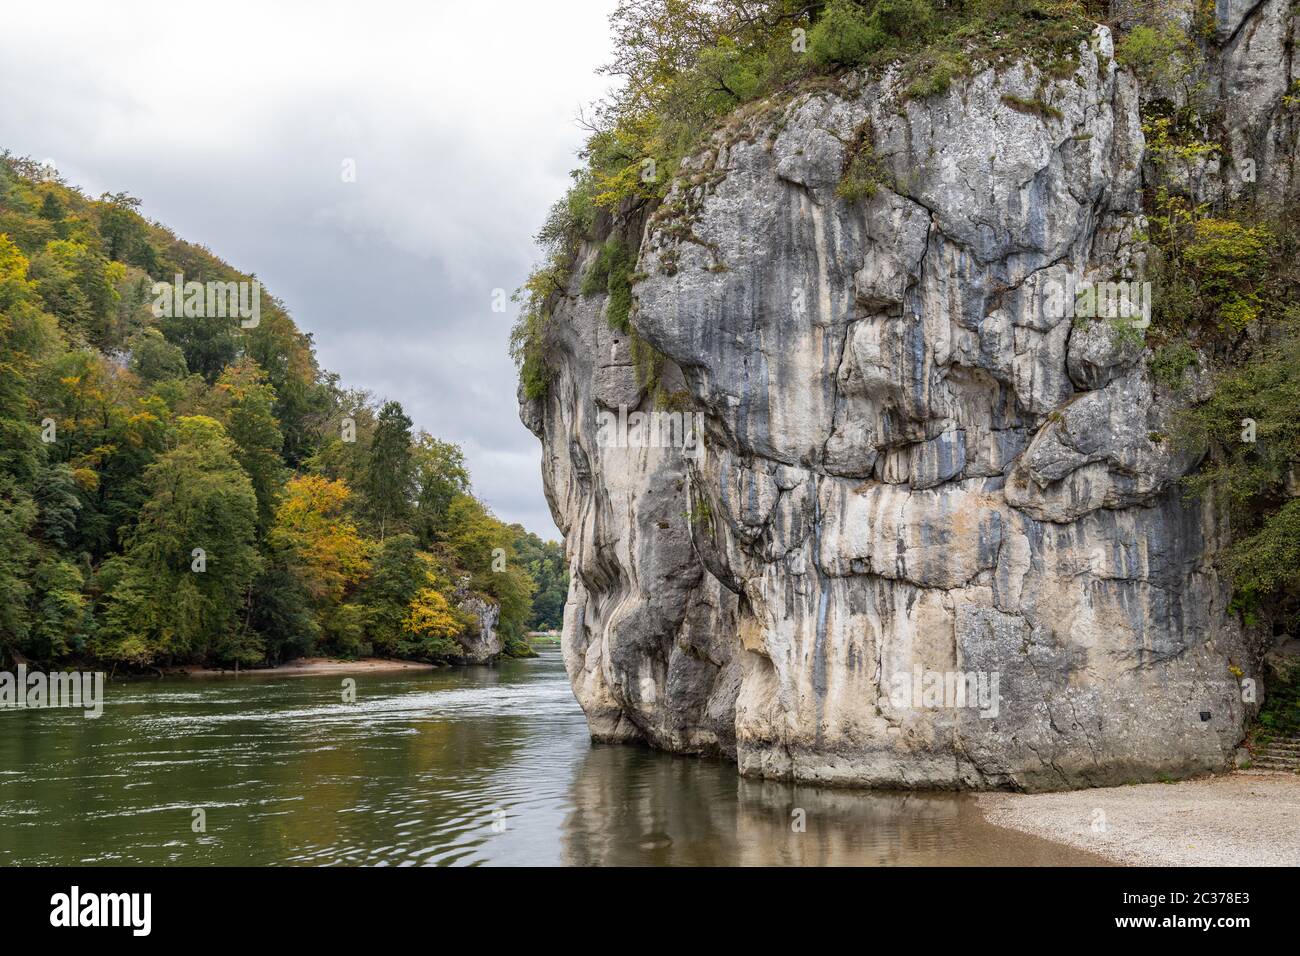 Nature reserve at Danube river breakthrough near Kelheim, Bavaria, Germany in autumn with limestone rock formations and plants with colorful leaves, a Stock Photo